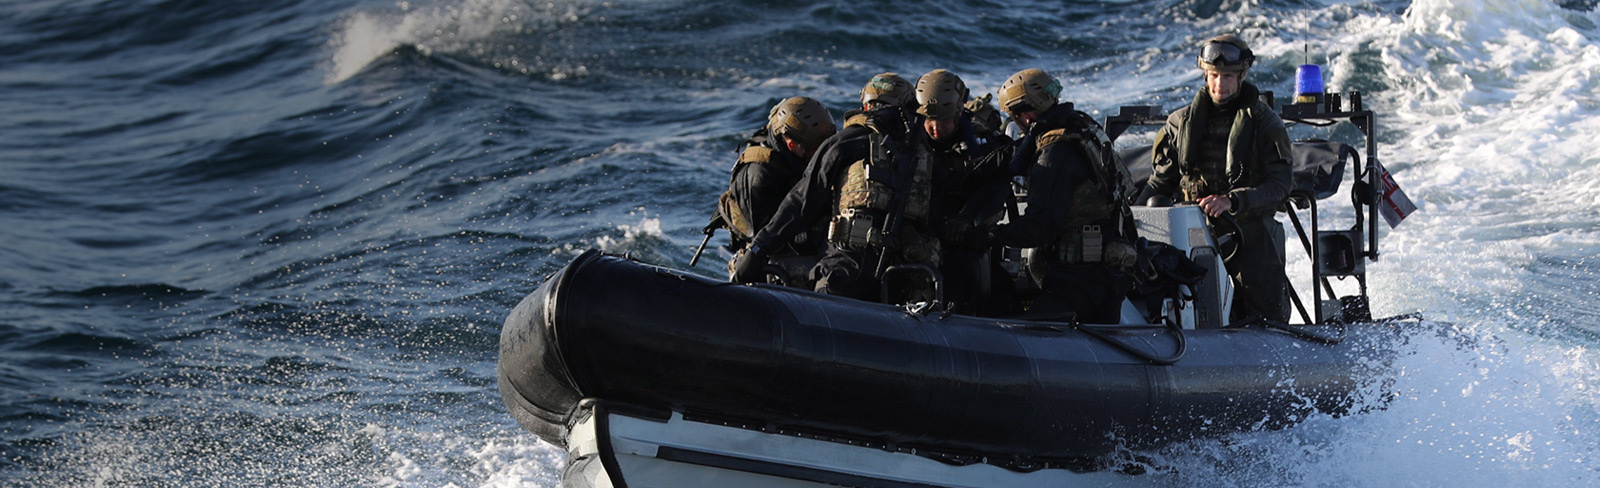 Image showing Pacific 24 RIB (Rigid Inflatable Boat) - ©UK MOD CROWN COPYRIGHT, 2015